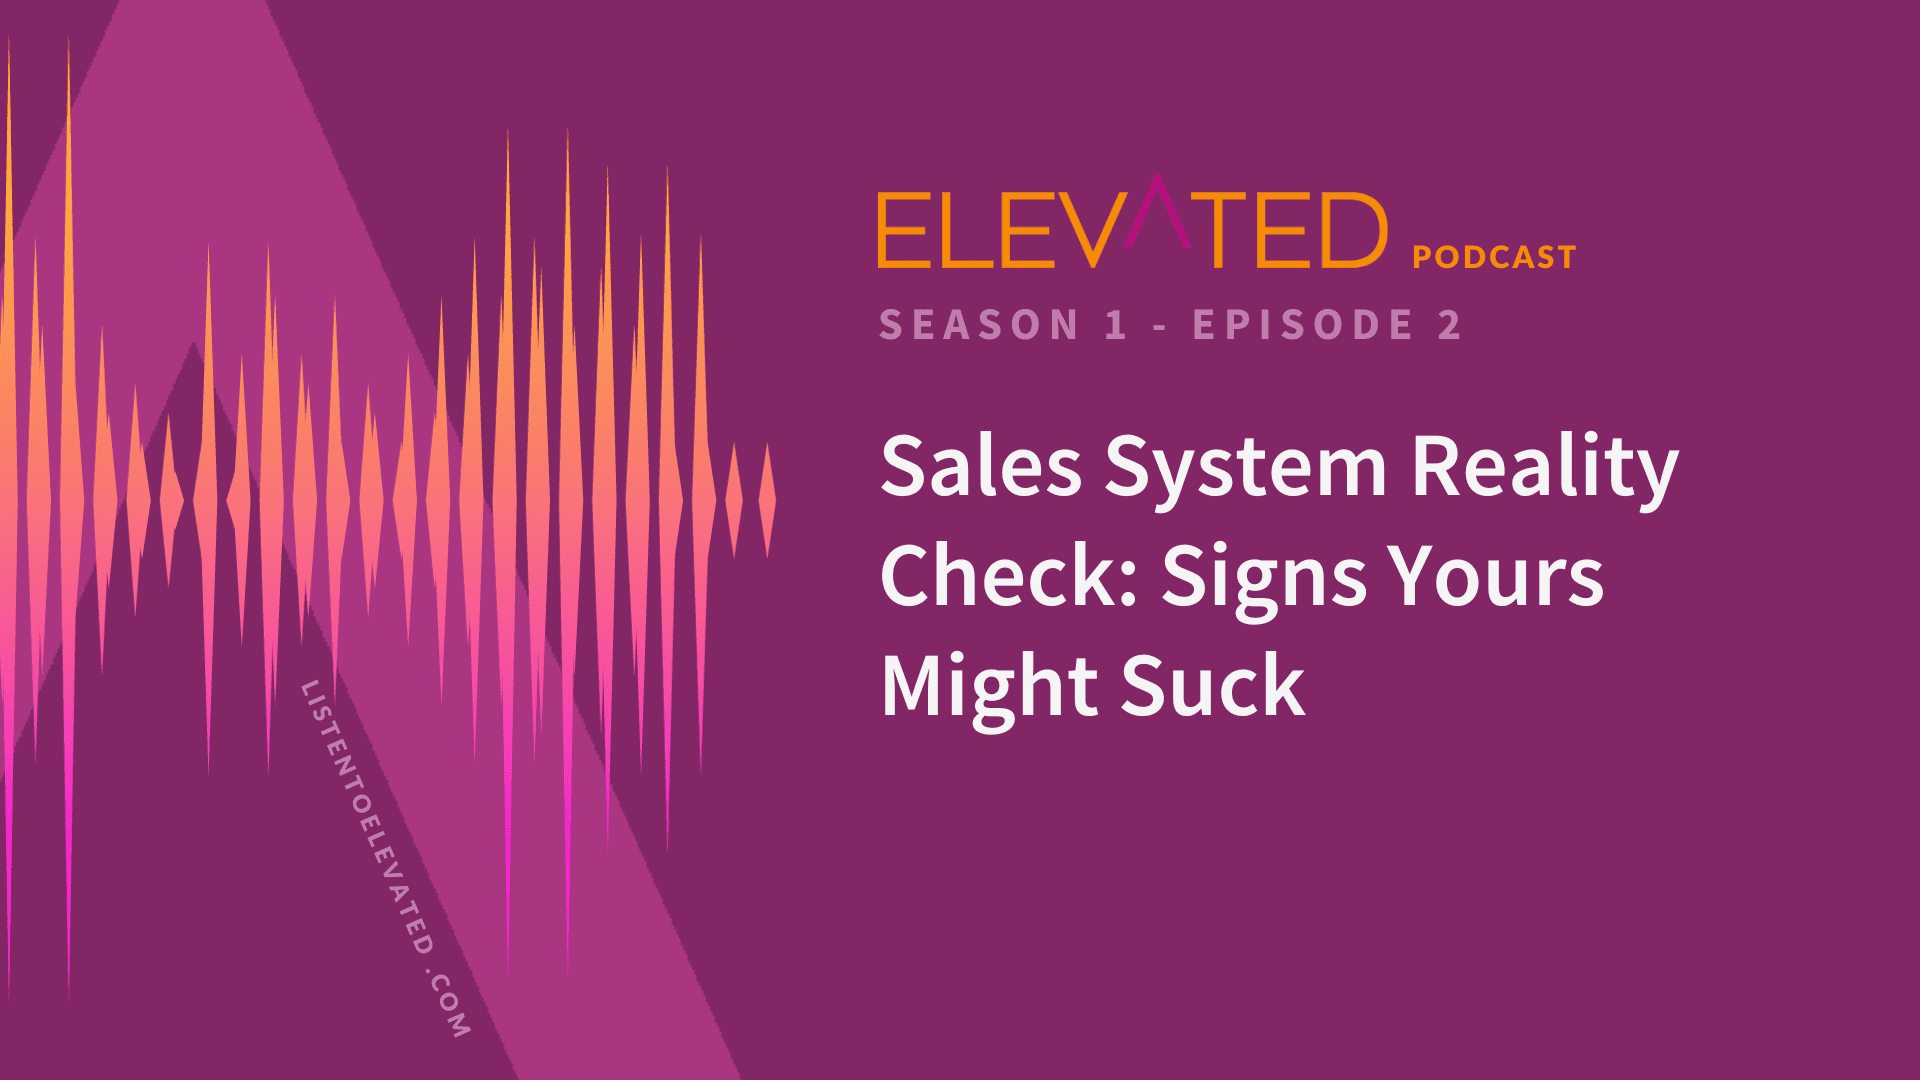 Sales System Reality Check: Signs Yours Might Suck